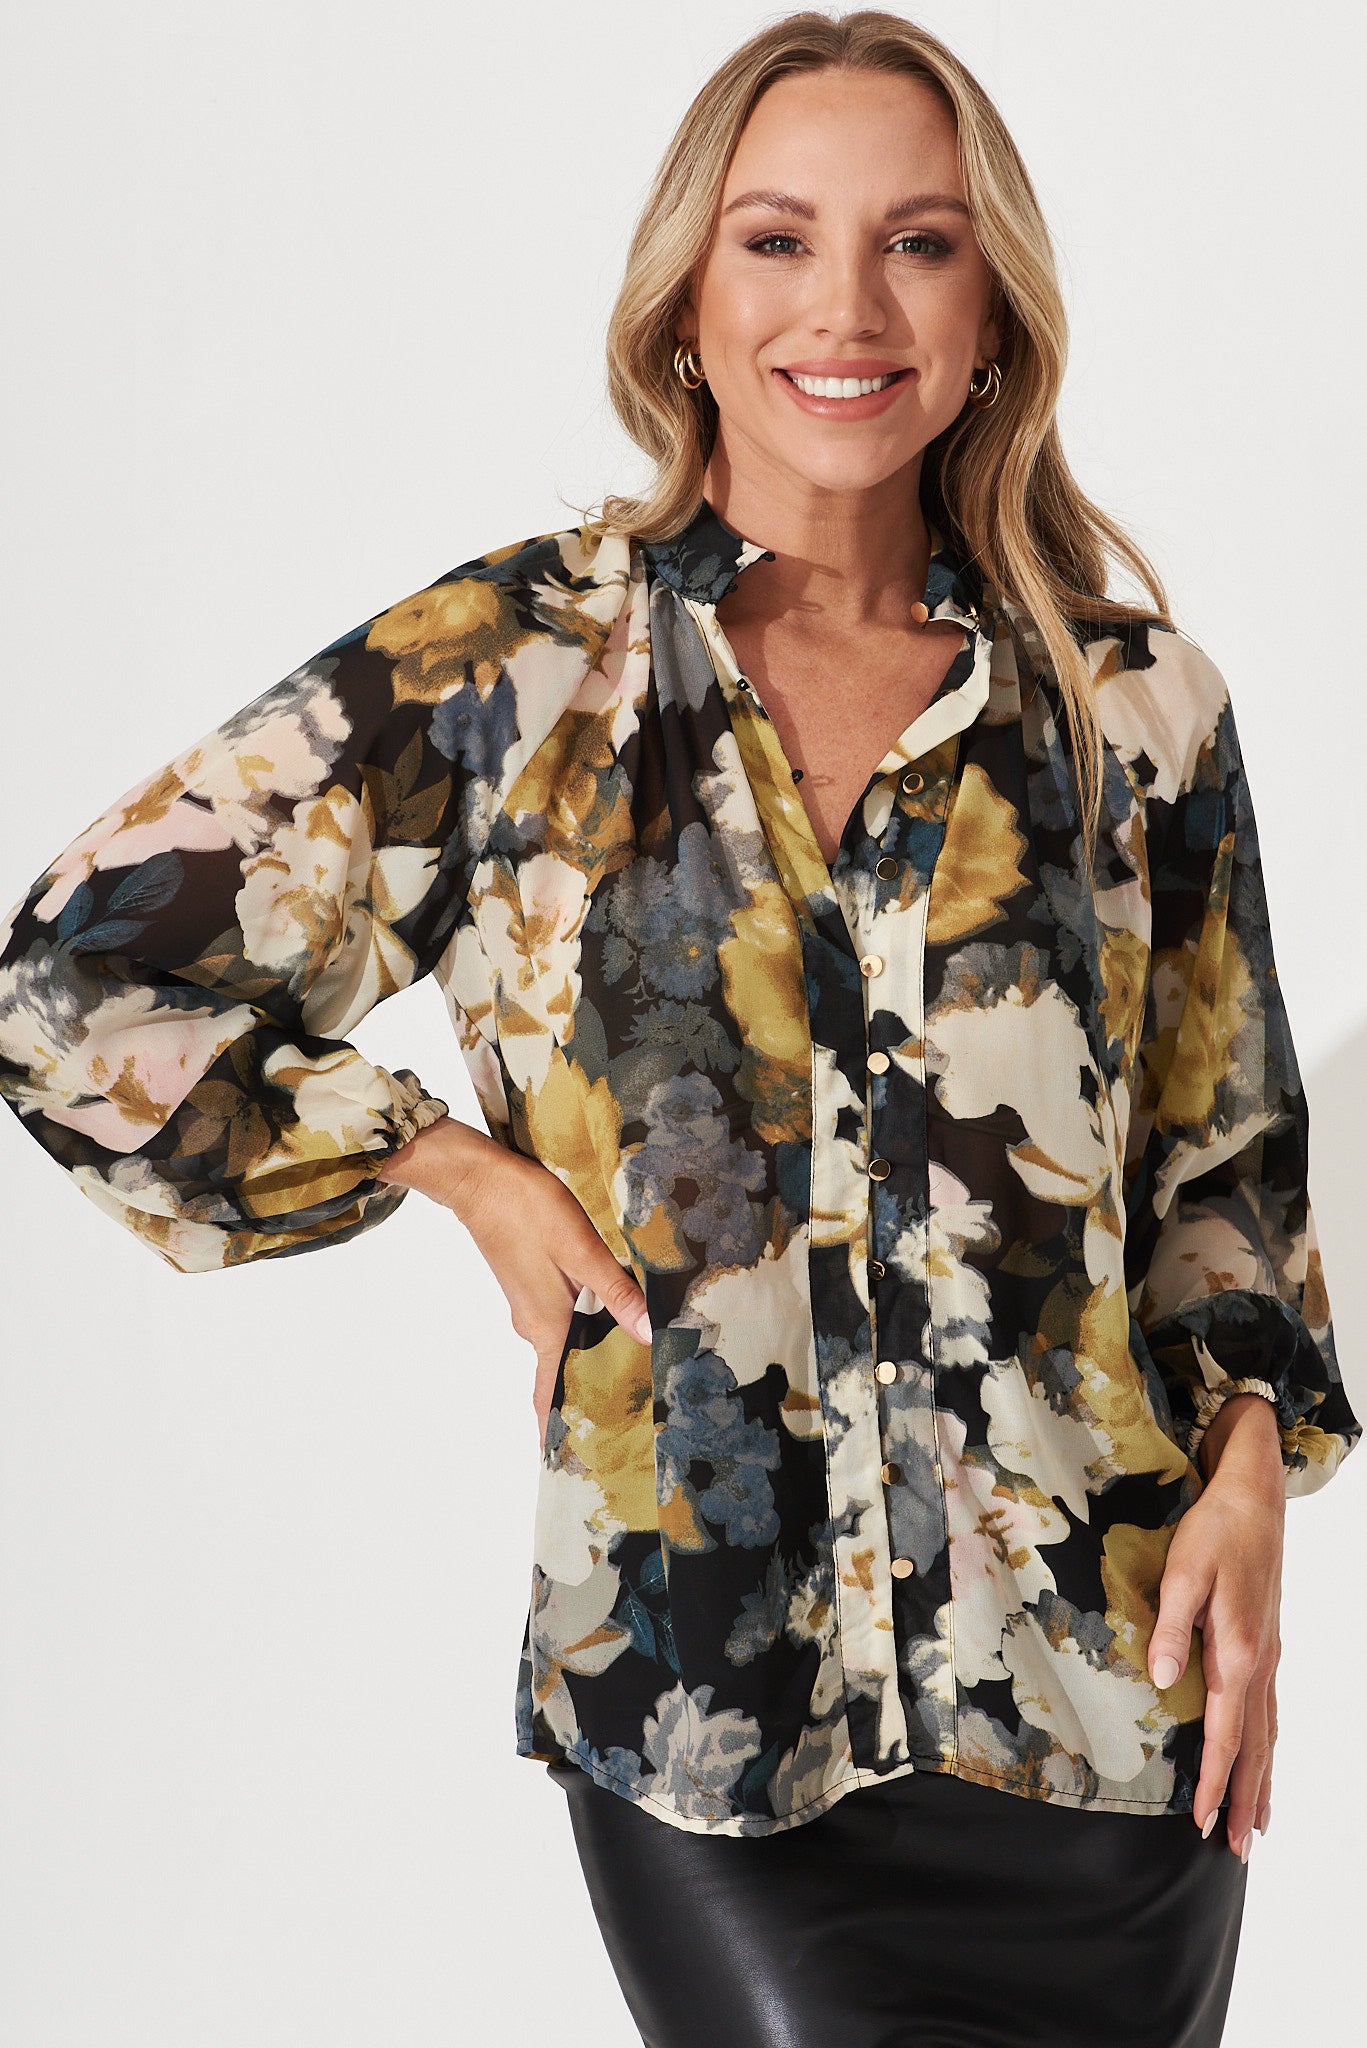 Aaliyah Shirt In Black With Cream And Mustard Floral Chiffon - front